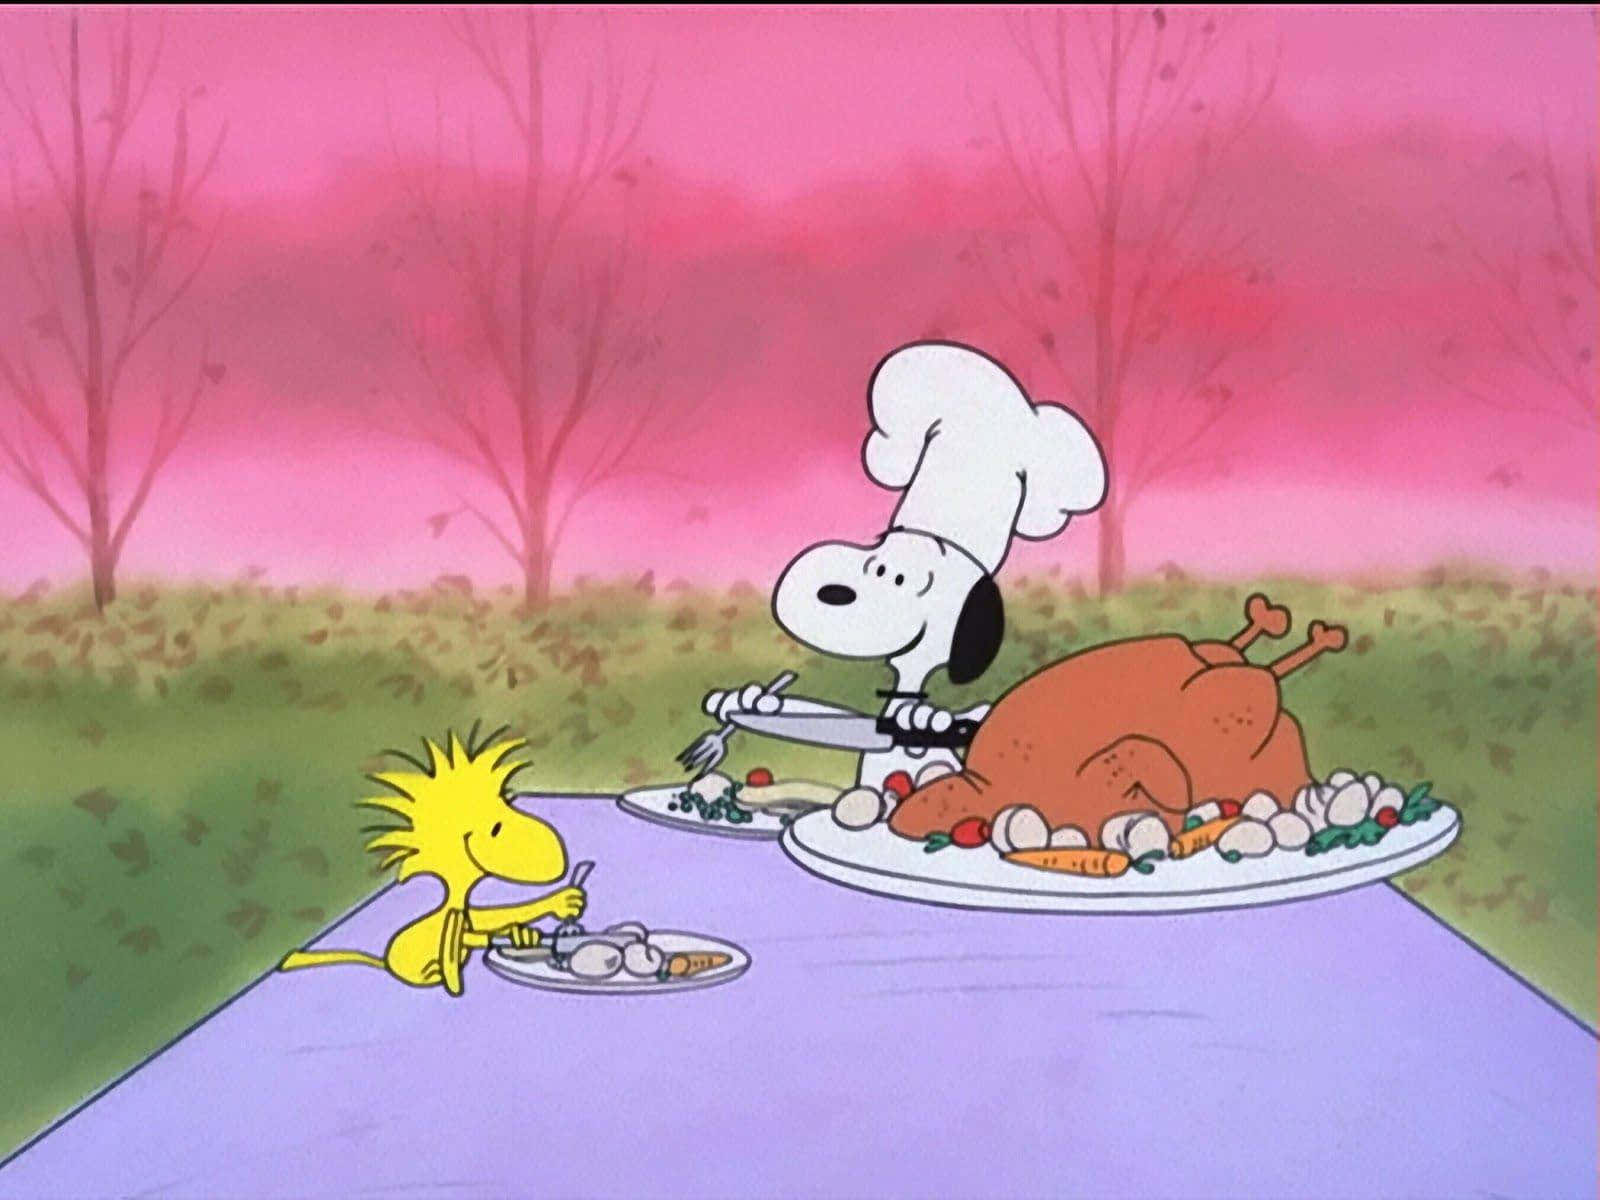 Enjoying the Fall with Snoopy! Wallpaper